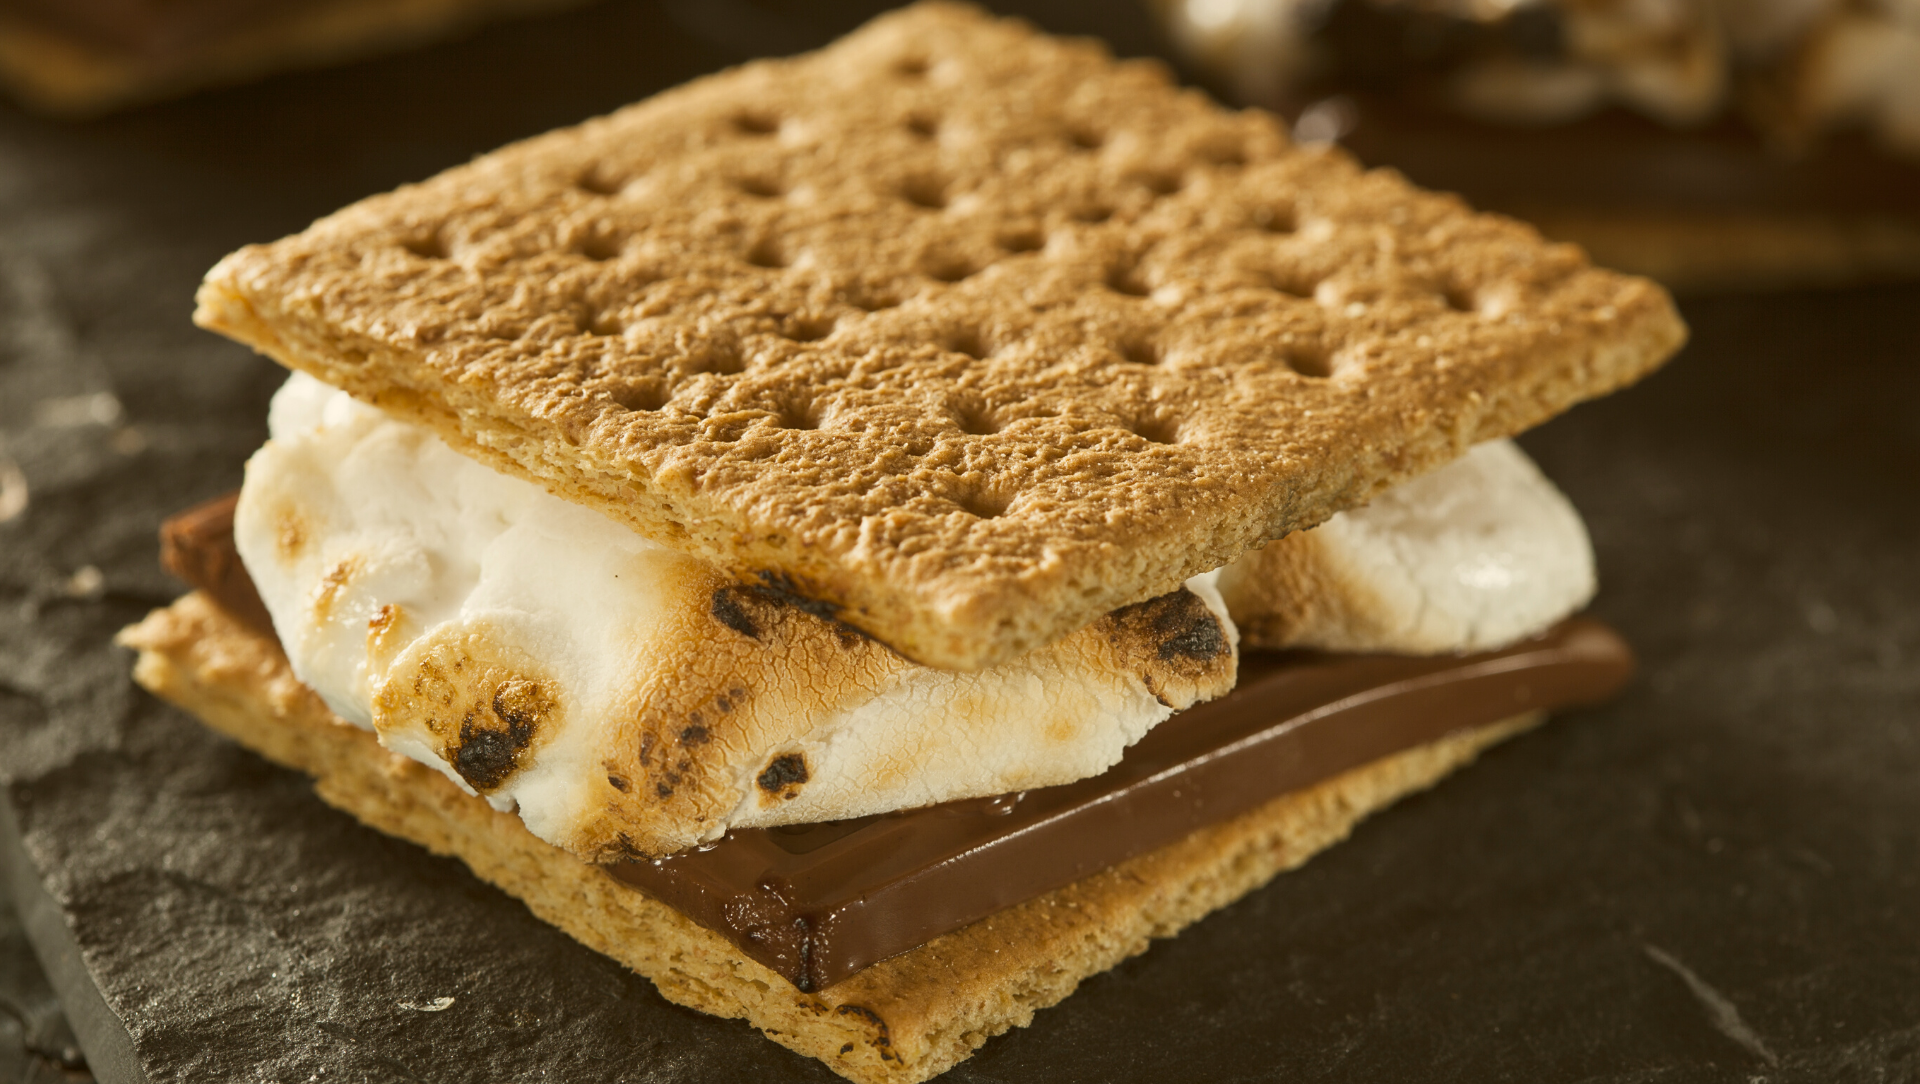 close up of a s'more with graham cracker, chocolate and marshmallows